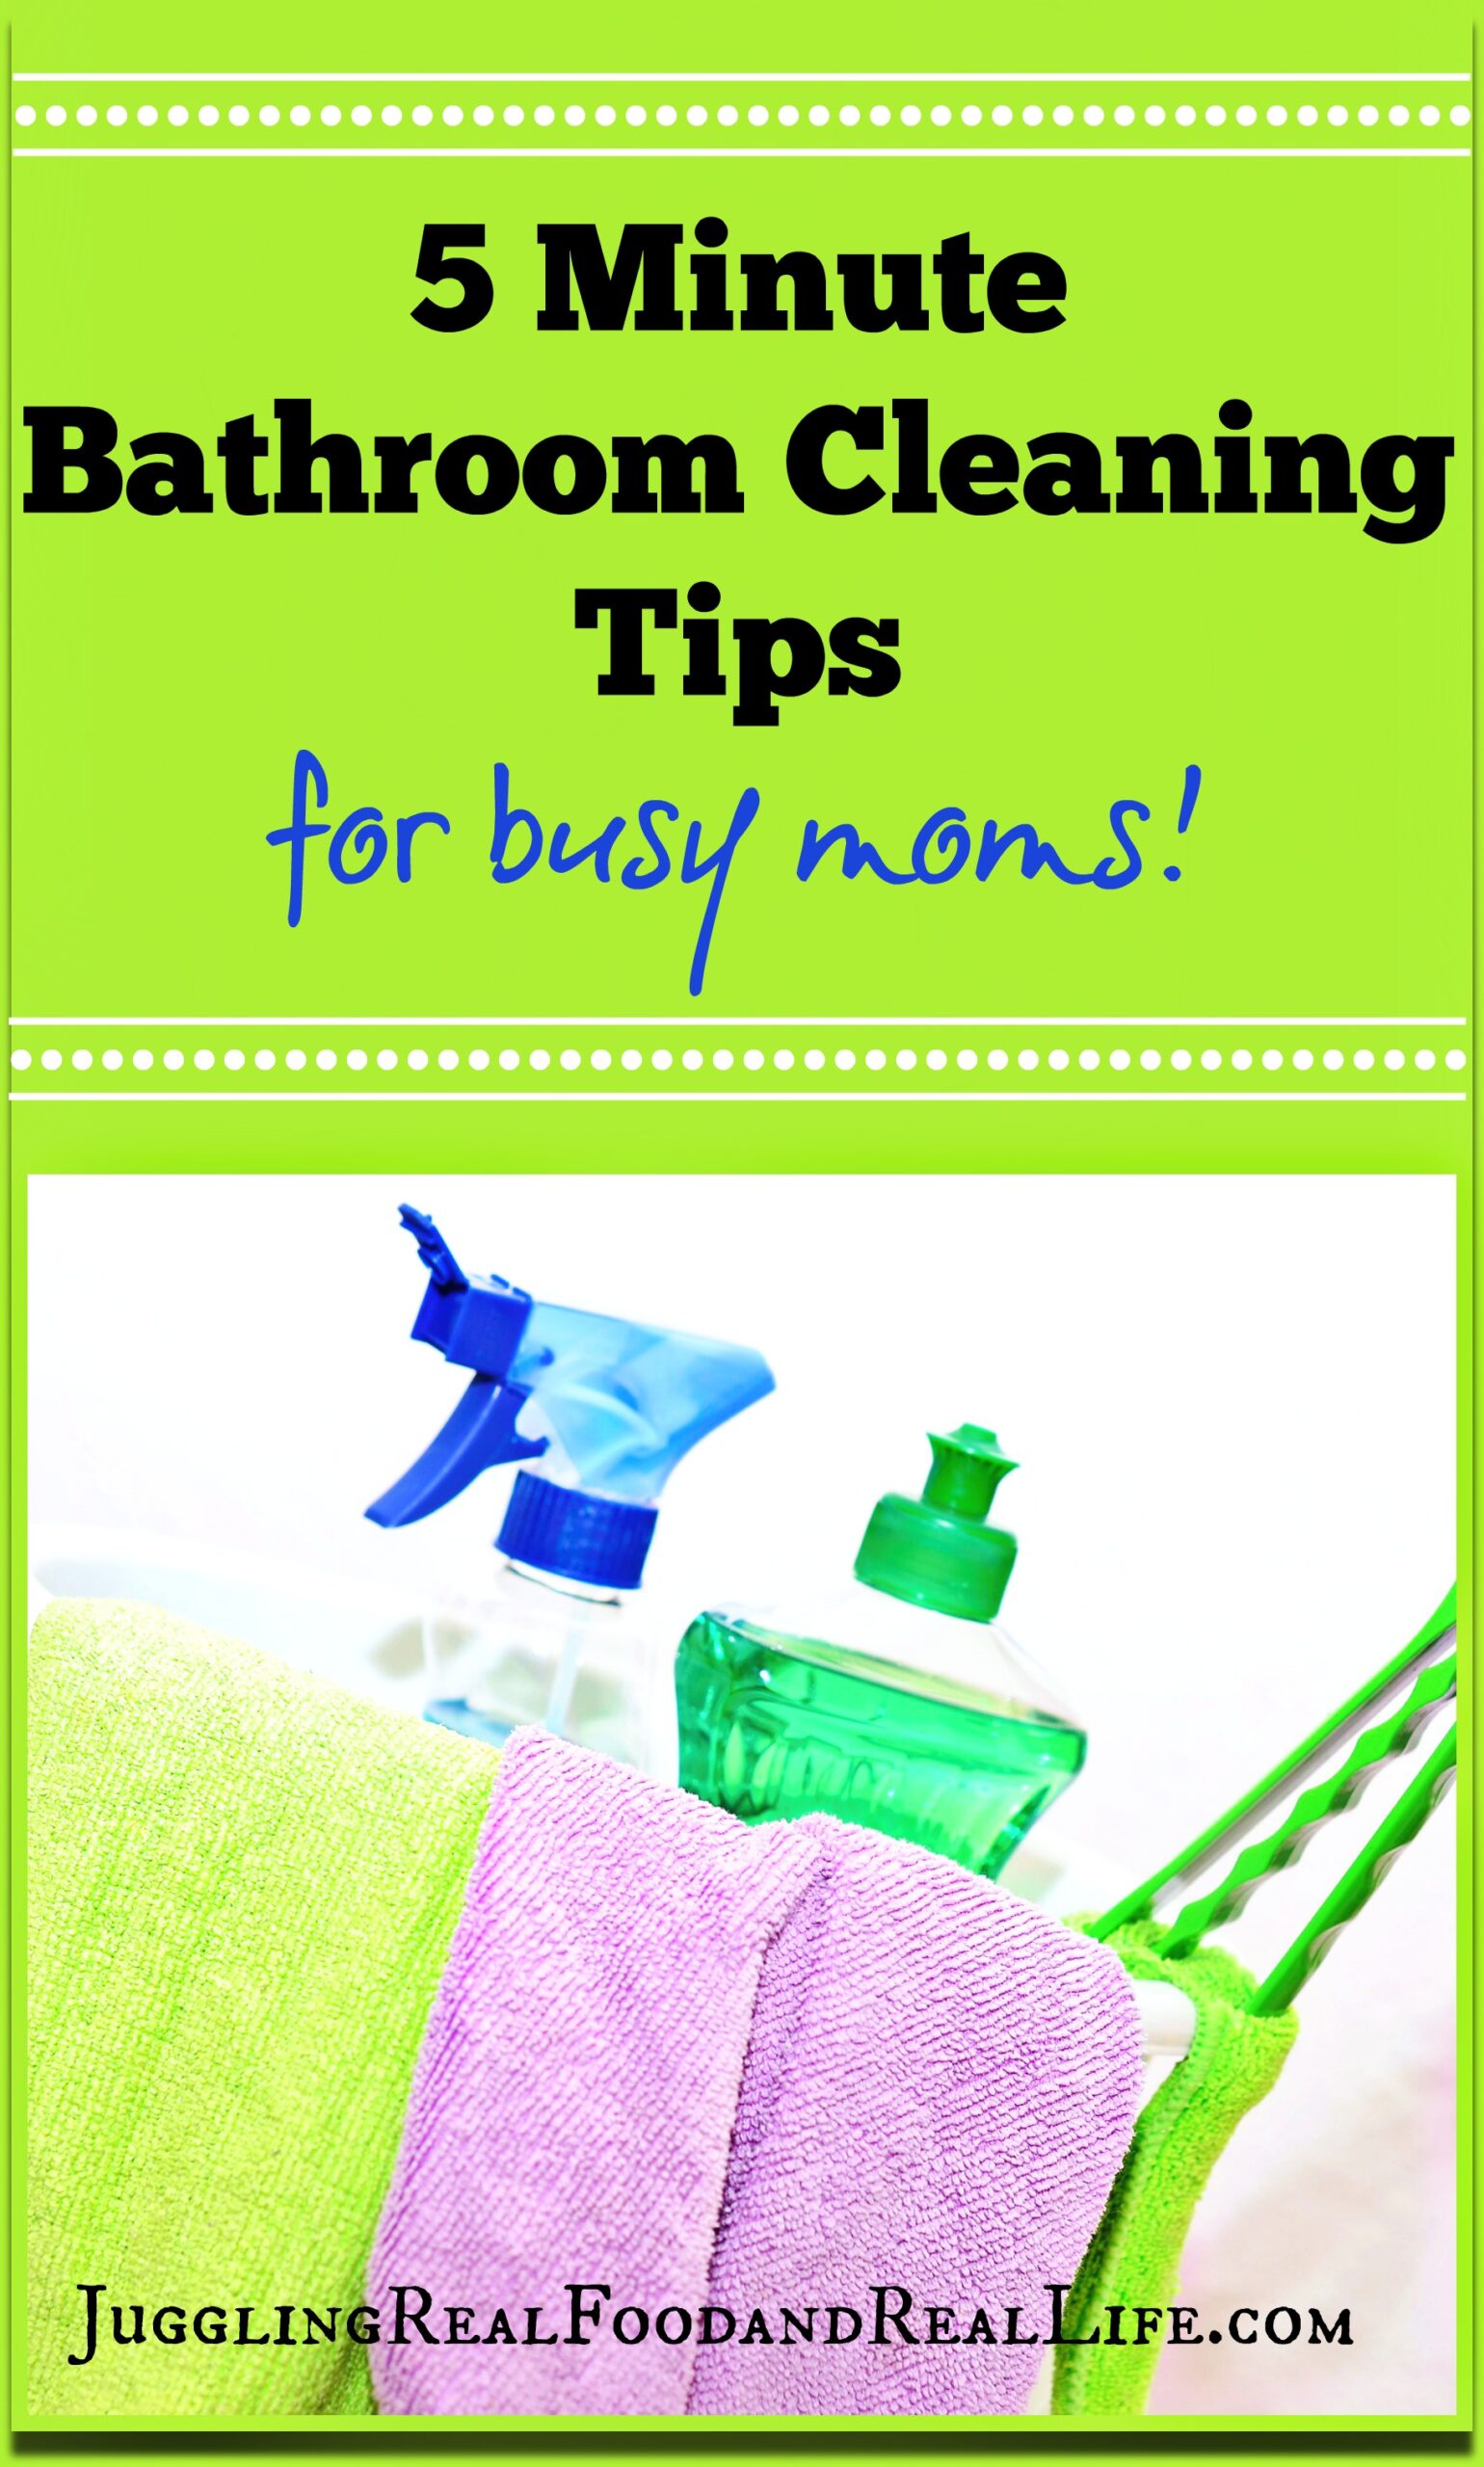 5 Minute Bathroom Cleaning Tips for Busy Moms